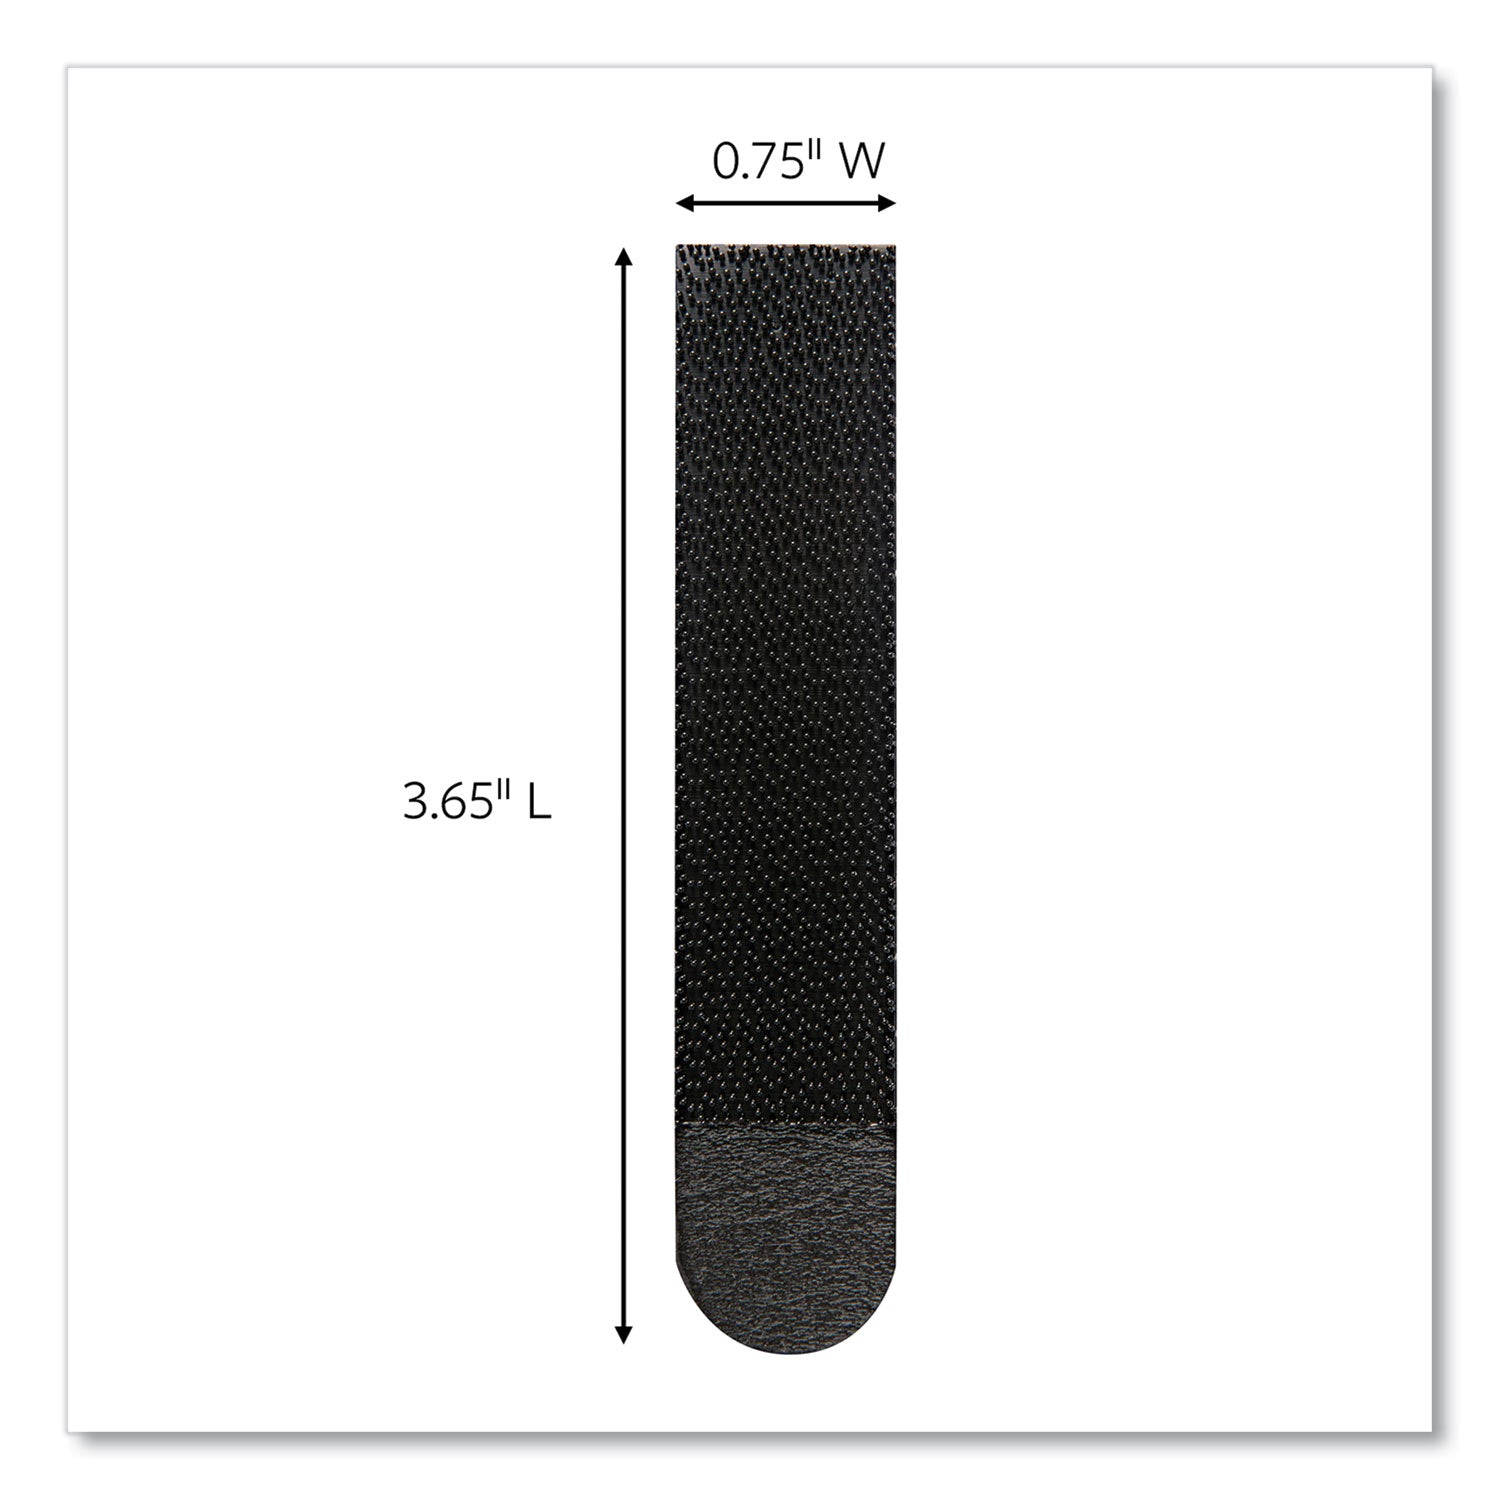 picture-hanging-strips-removable-holds-up-to-4-lbs-per-pair-075-x-365-black-4-pairs-pack_mmm17206blk - 2